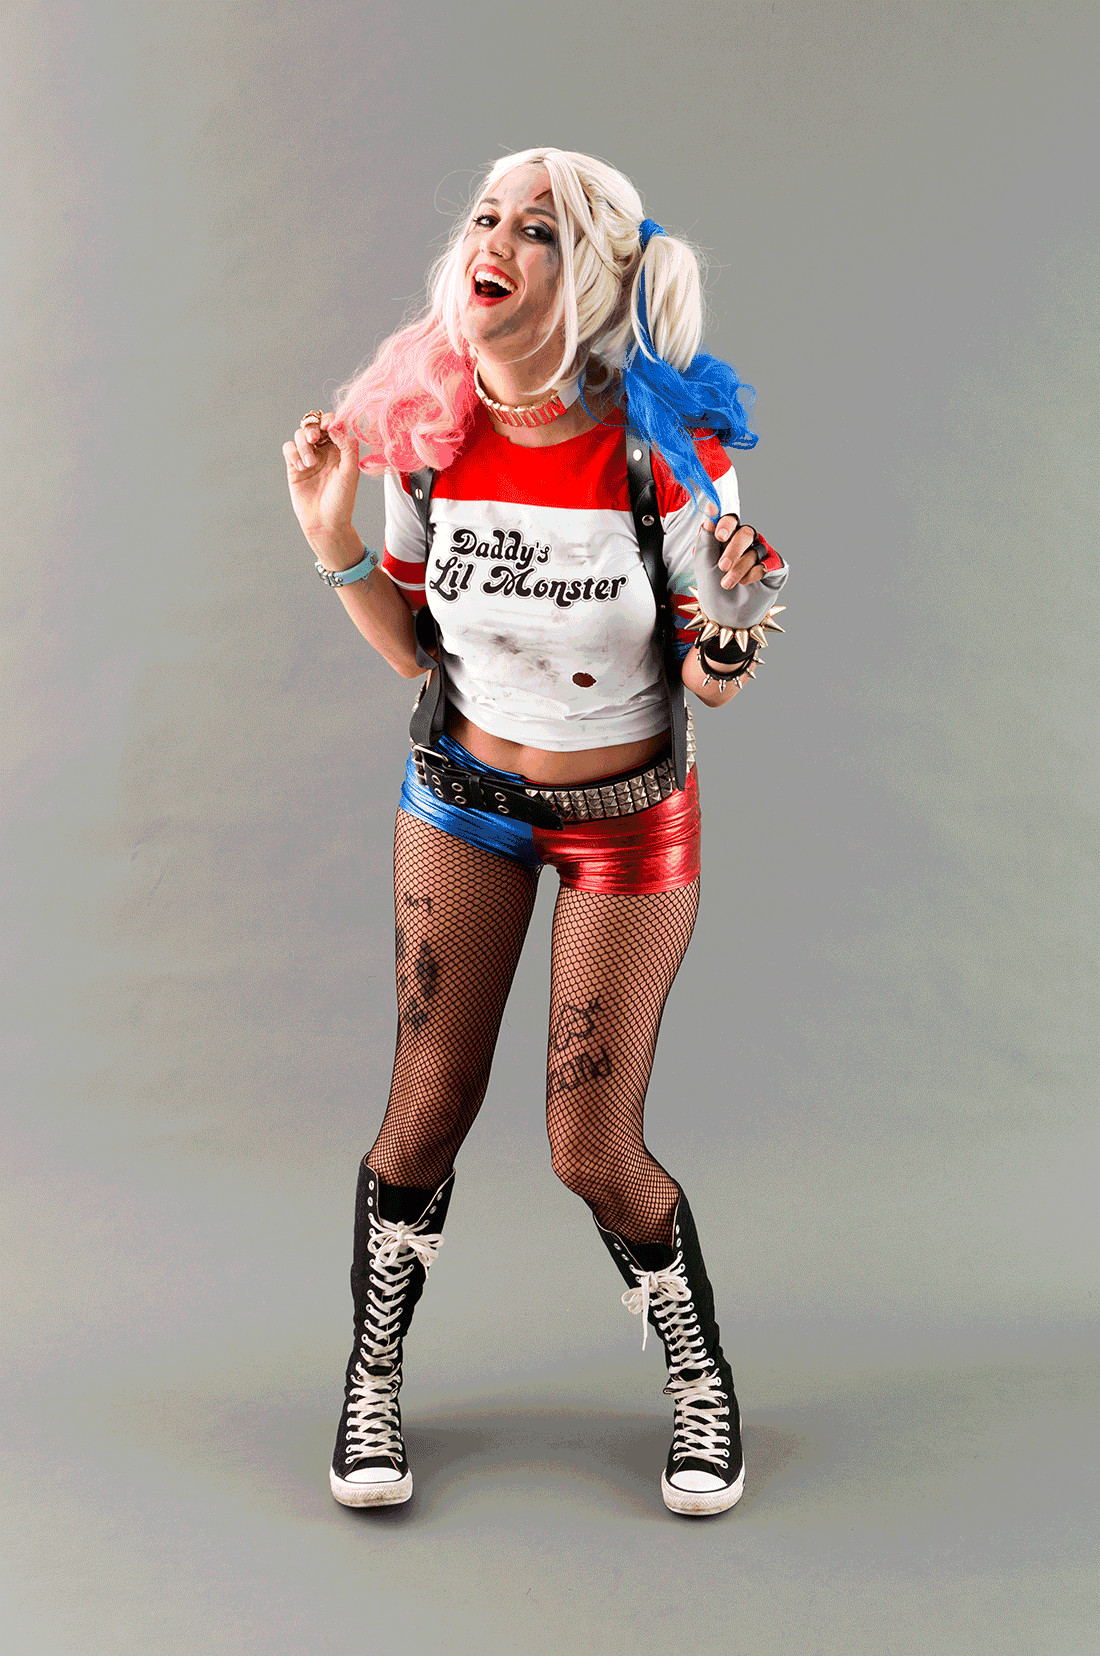 DIY Harley Quinn Costume
 How to Make Suicide Squad’s Harley Quinn Costume for